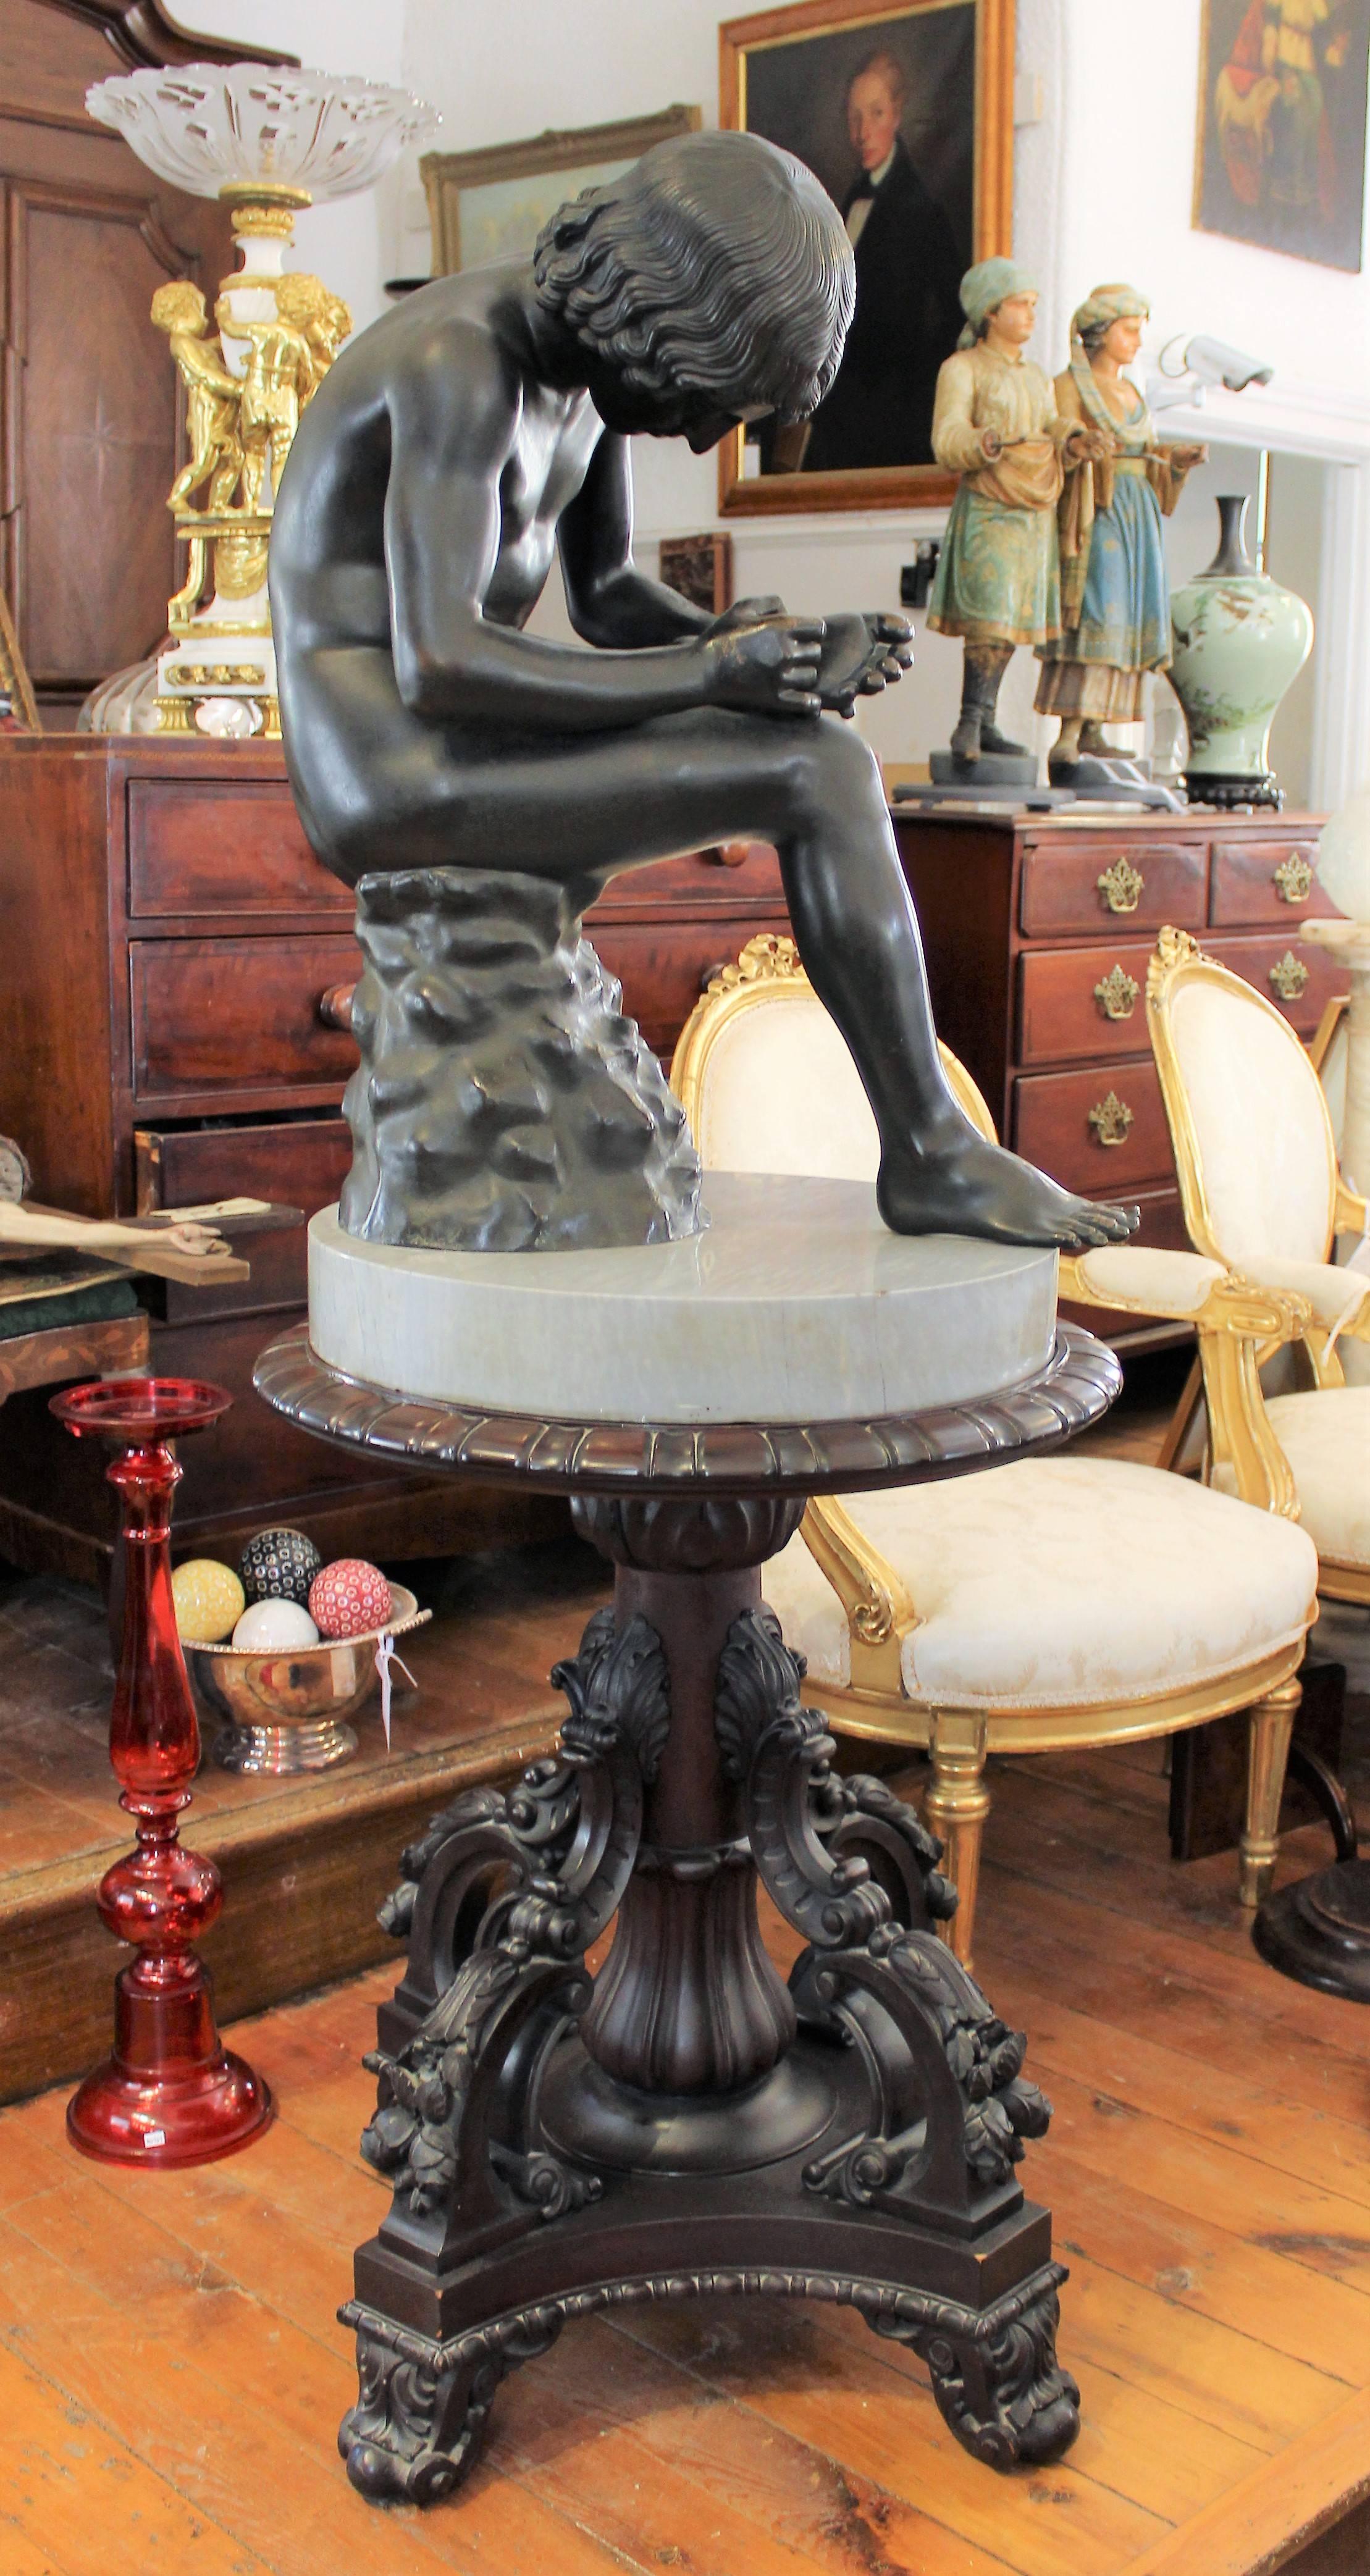 Large 19th century Italian 'Spinario' bronze sculpture on stand. This is a 19th century copy and the original is in the Capitaline Museum.